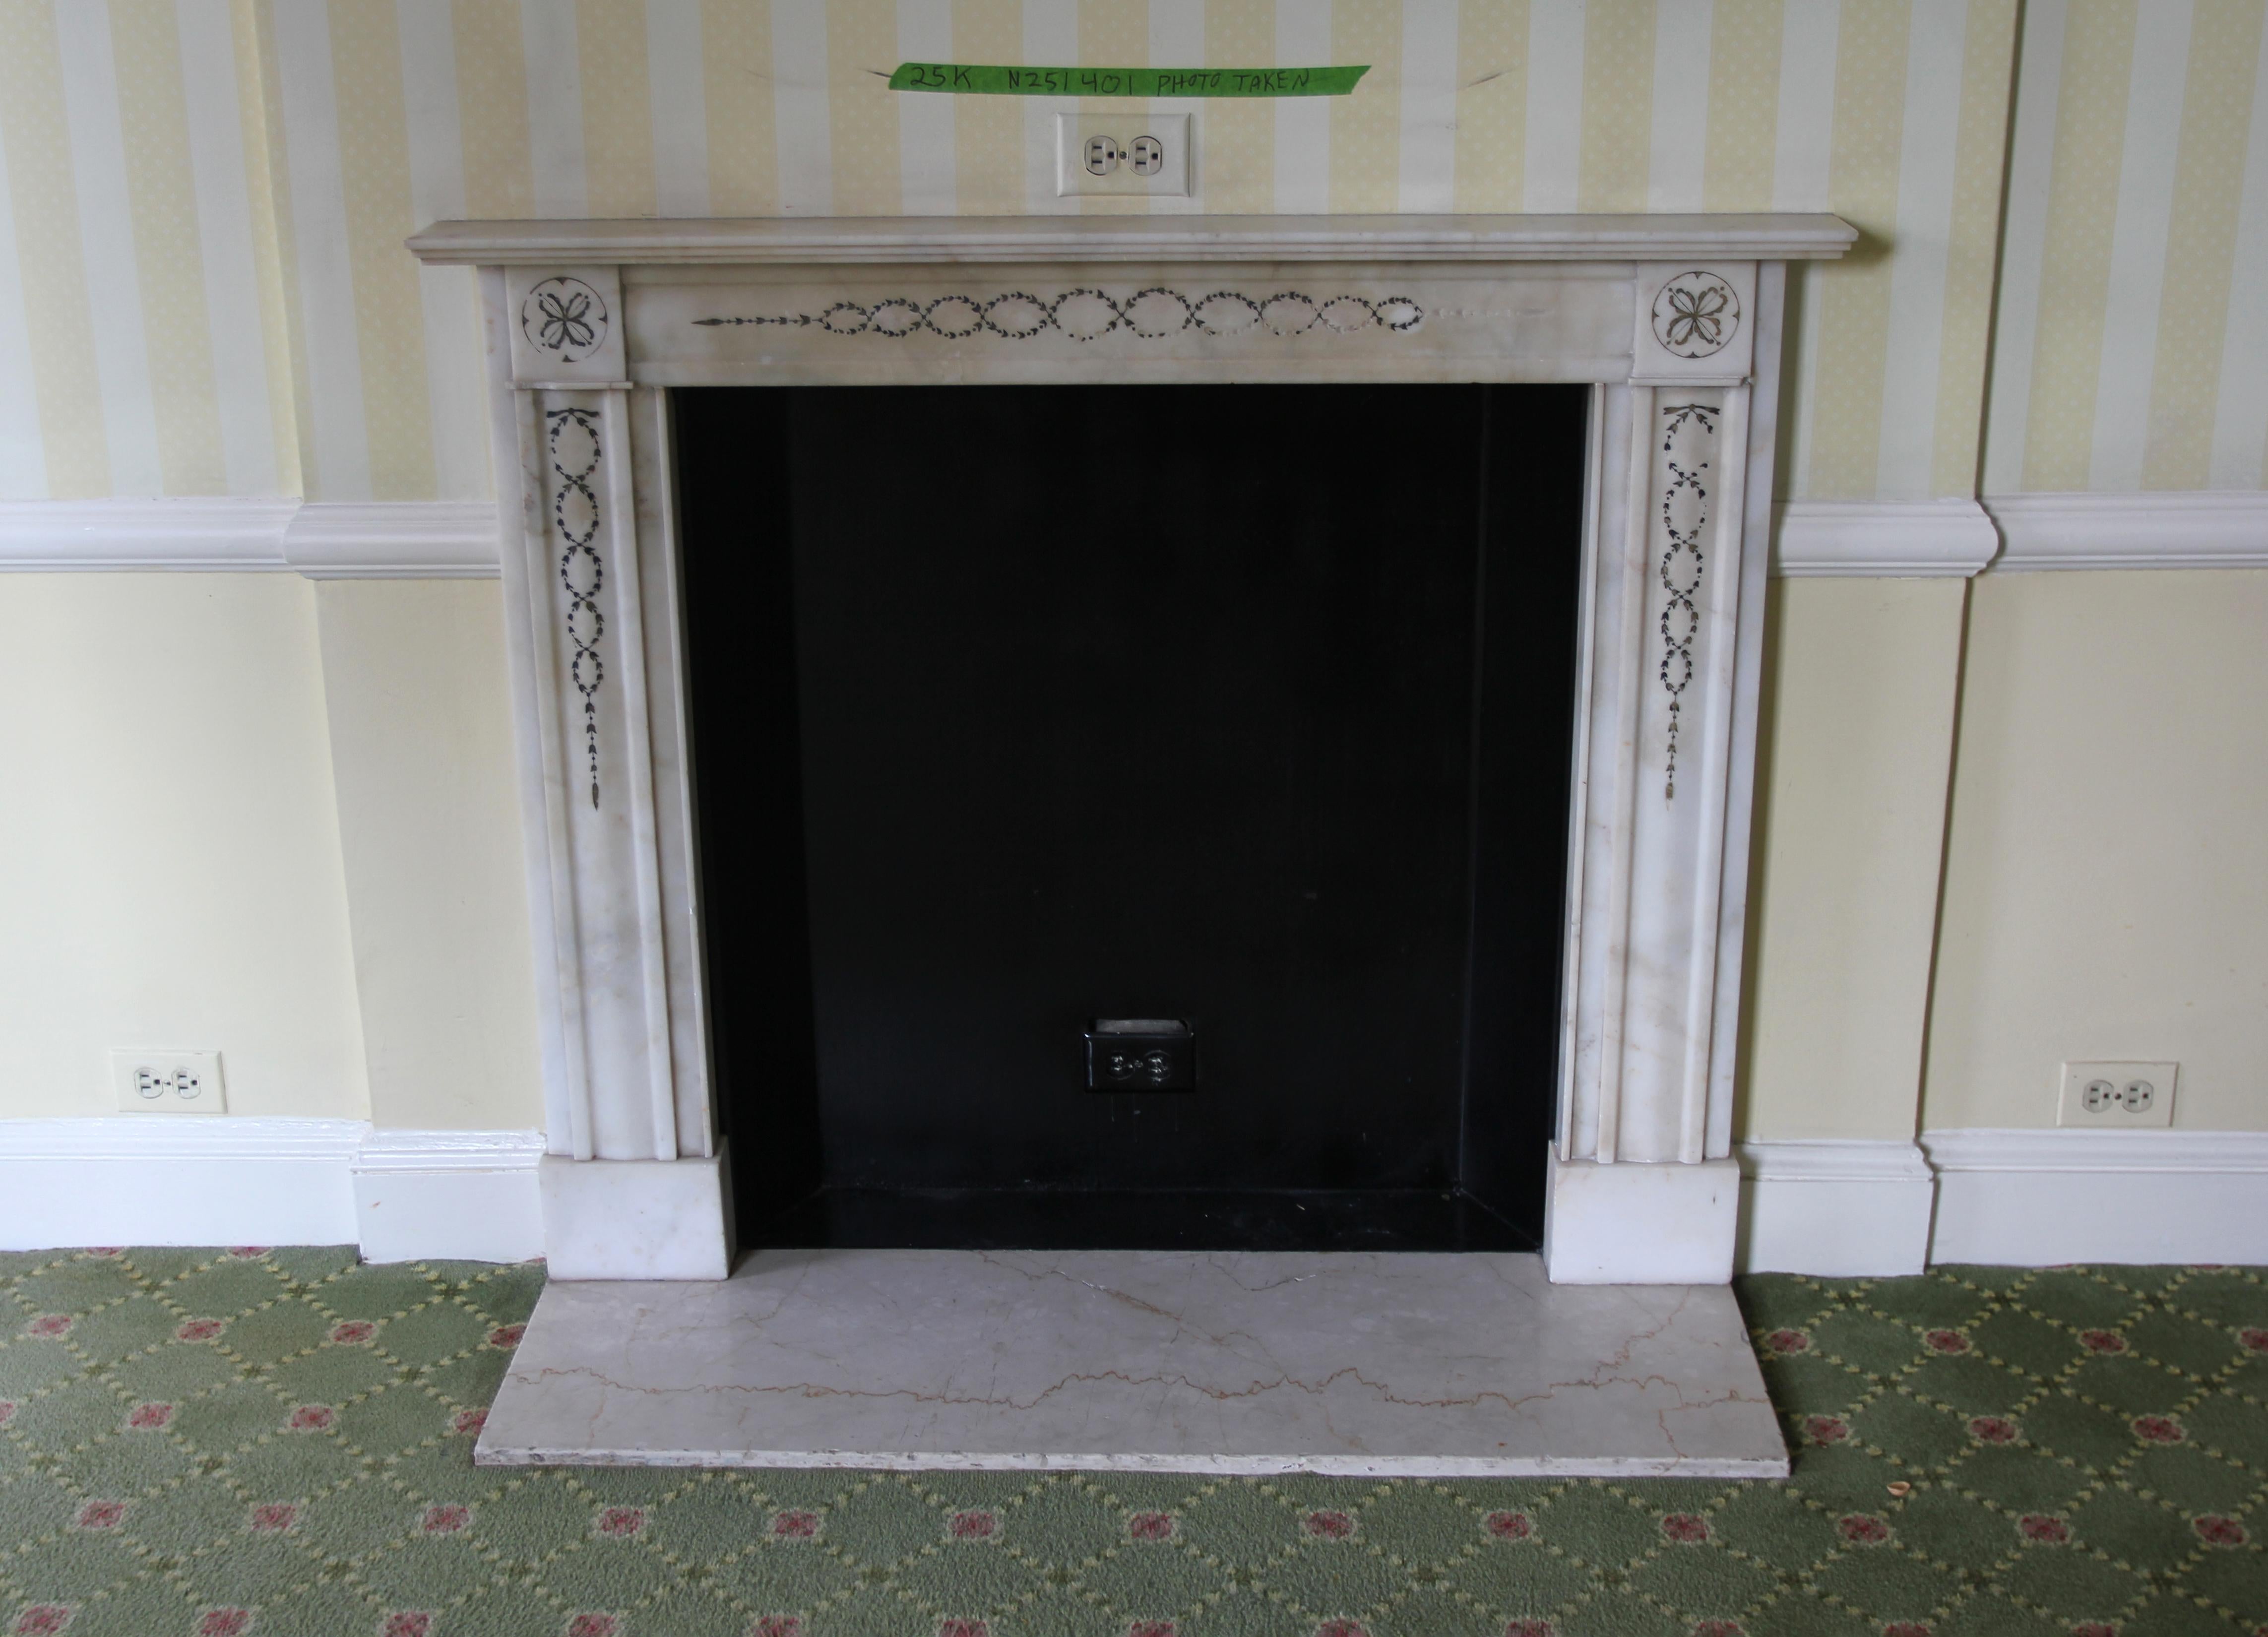 Hearth not included. Small French Regency style white marble mantel with decorative wreath detail on the header, top plinths and the sides. This mantel was one of a group of antique mantels imported from Europe and installed in the Waldorf Astoria